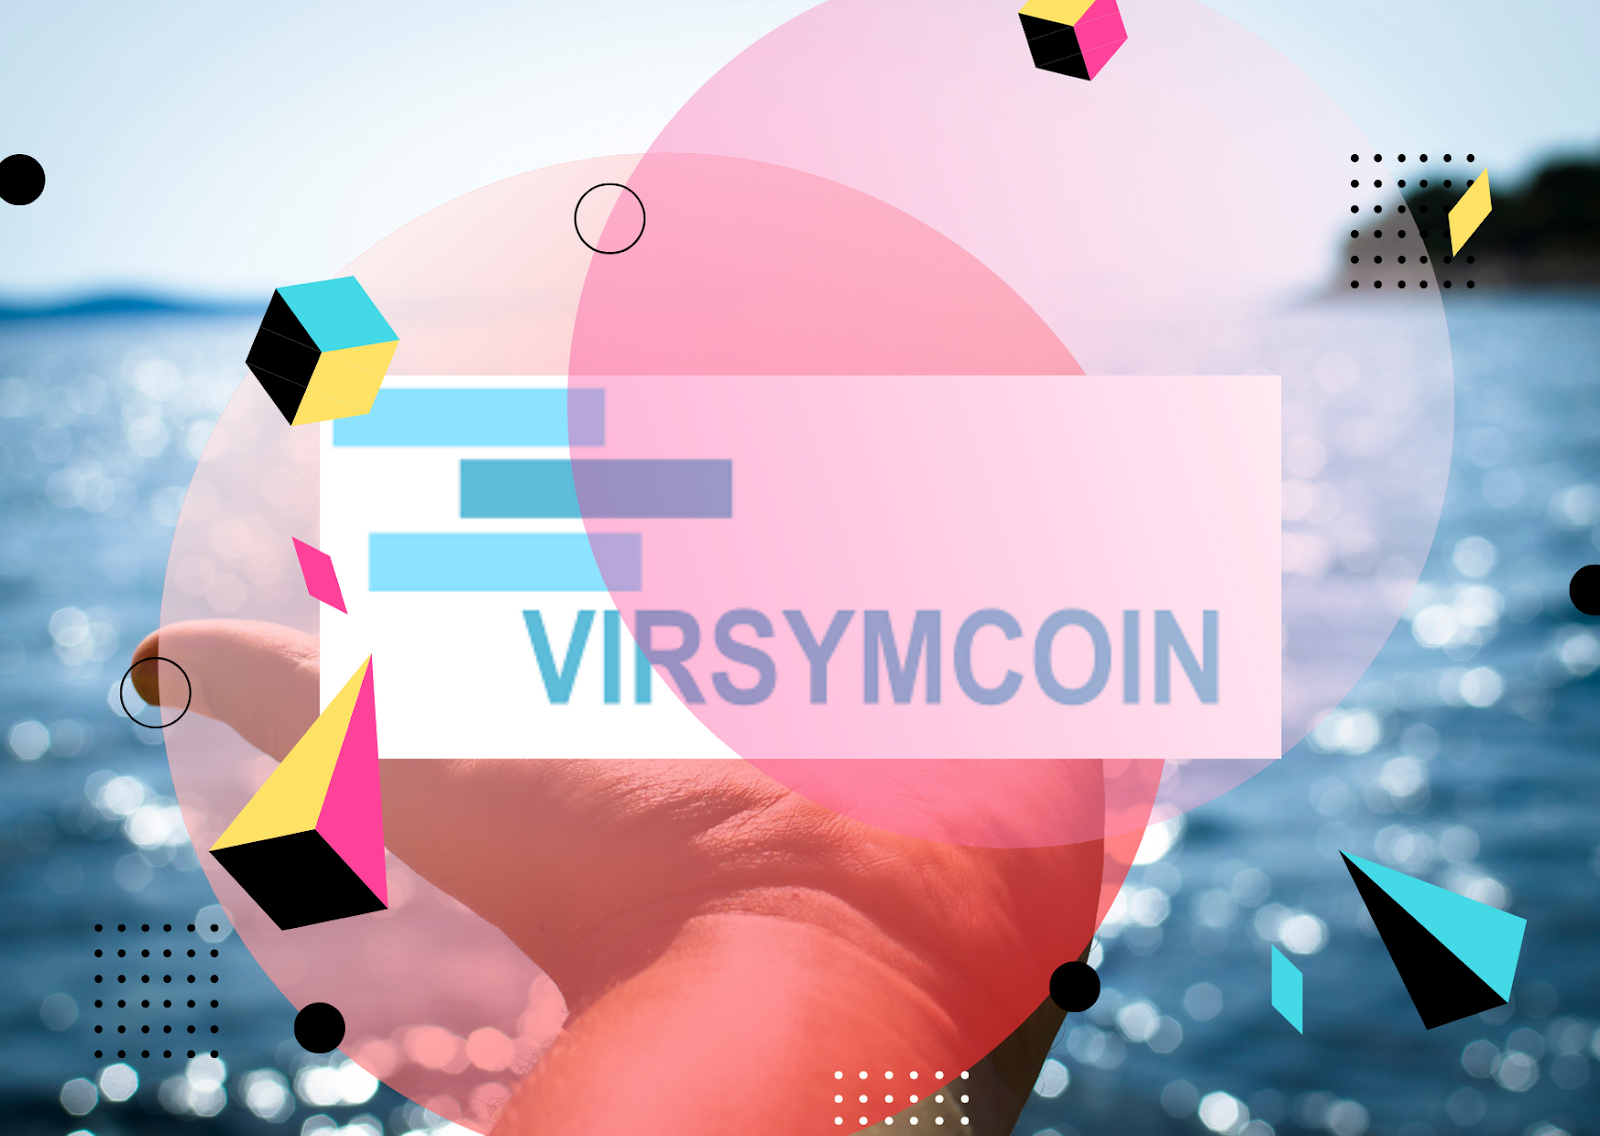 VirSymacoin, Monday, August 12, 2019, Press release picture